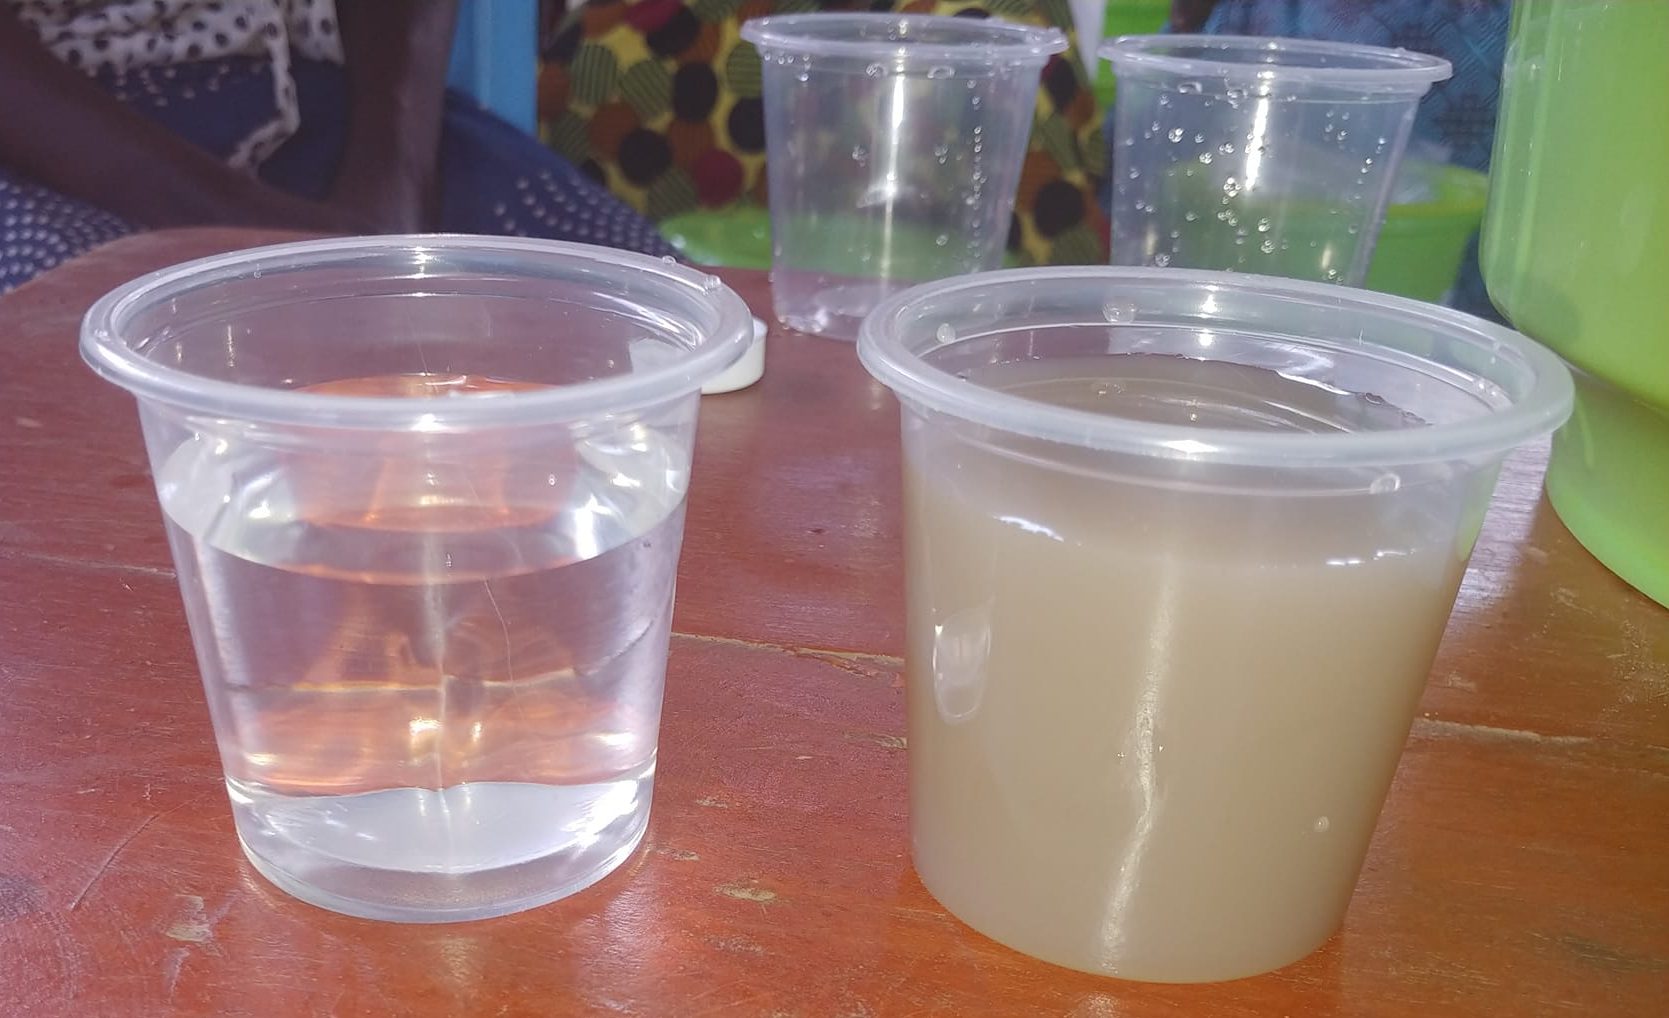 a cup of clear, clean, recently filtered water is next to a cup or brown, unfiltered water demonstrating the difference a SawyerOne filter can make